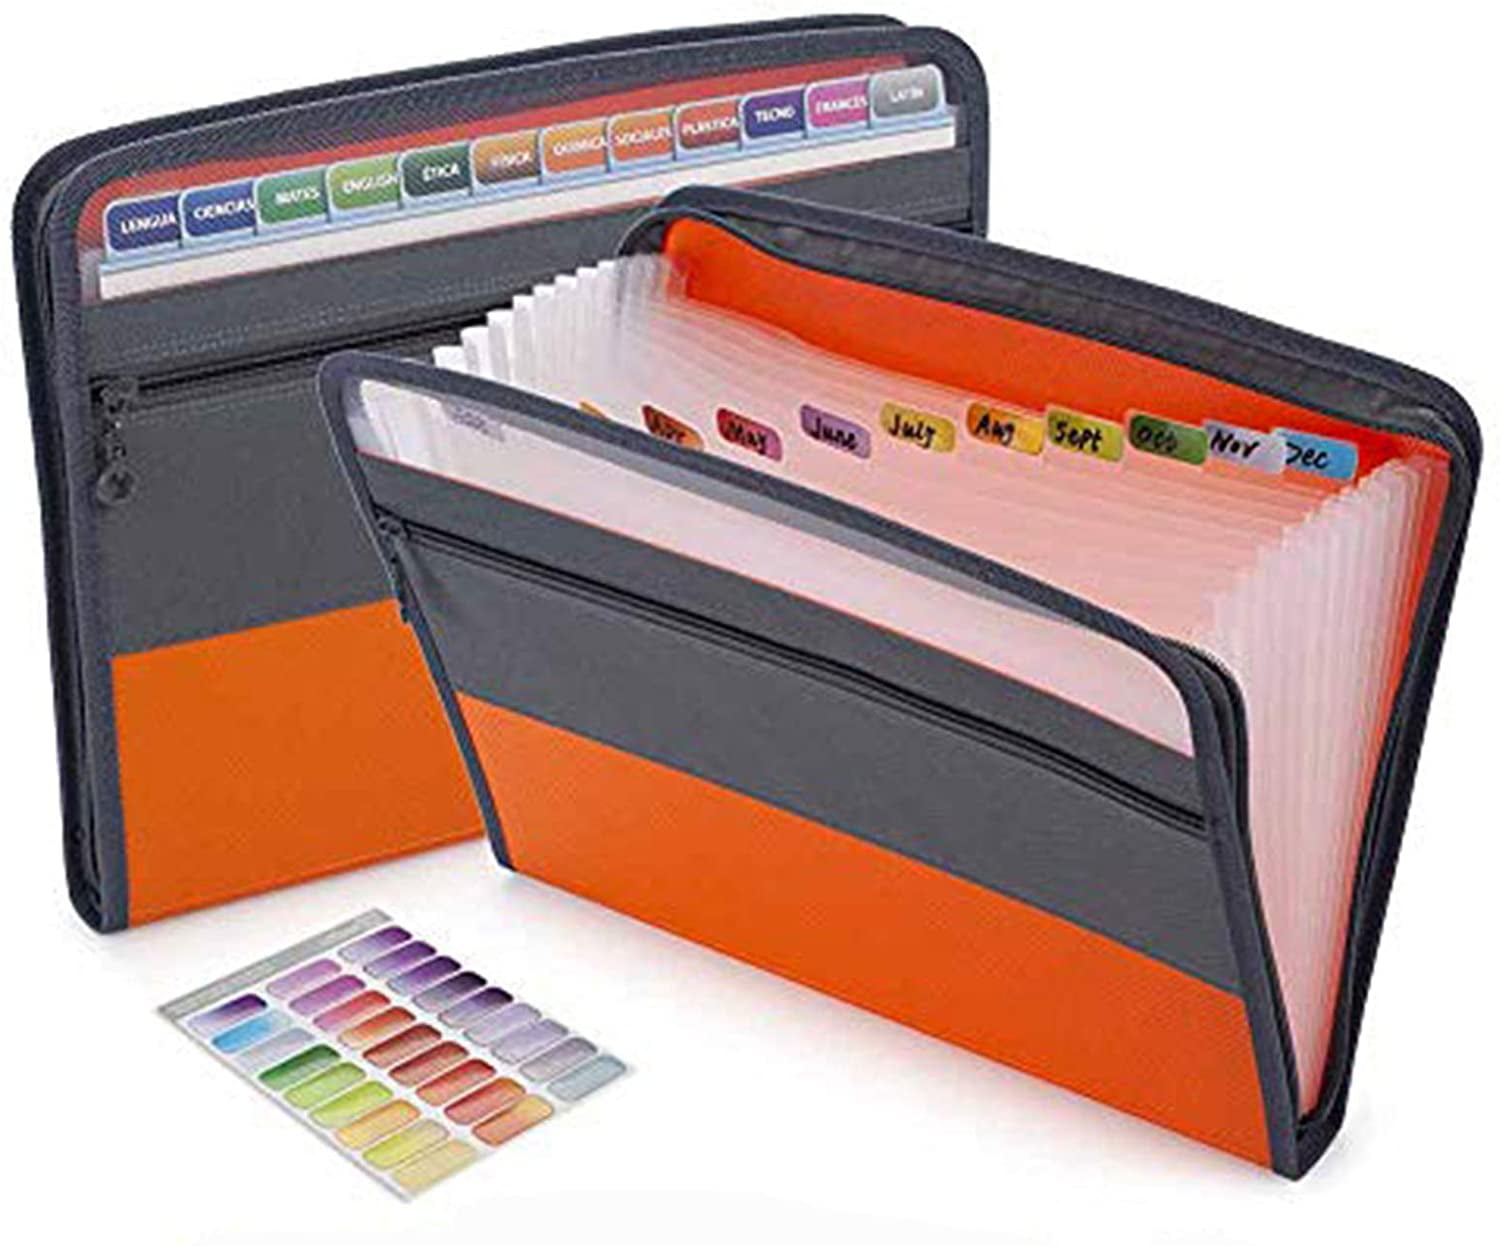 Expanding File System with 20 Pockets Organiser Folder for Important Documents. 